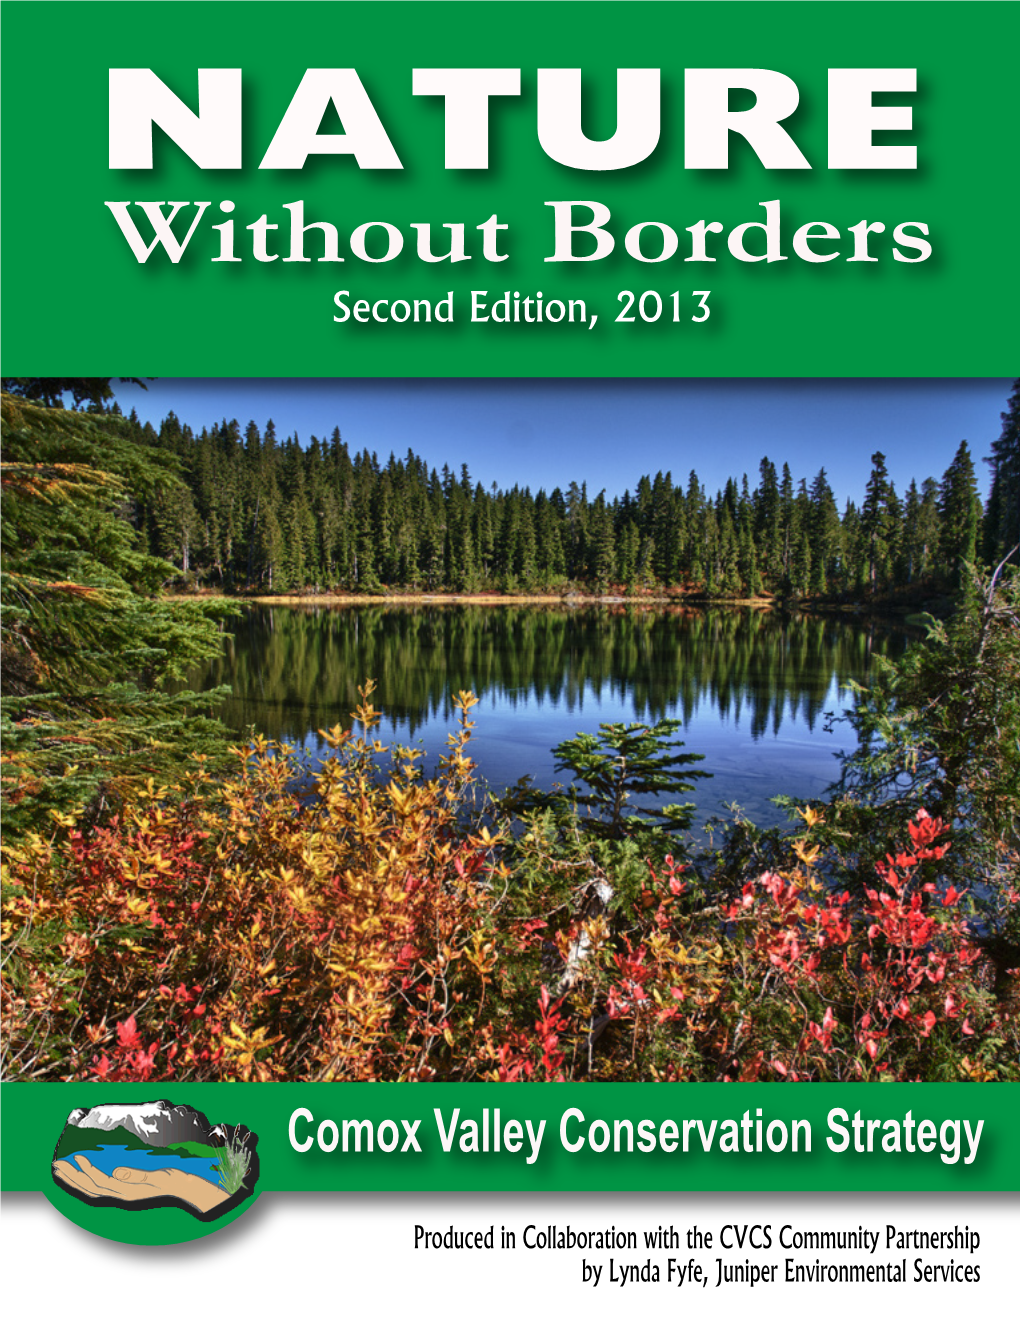 Nature Without Borders Comox Valley Land Trust.Pdf